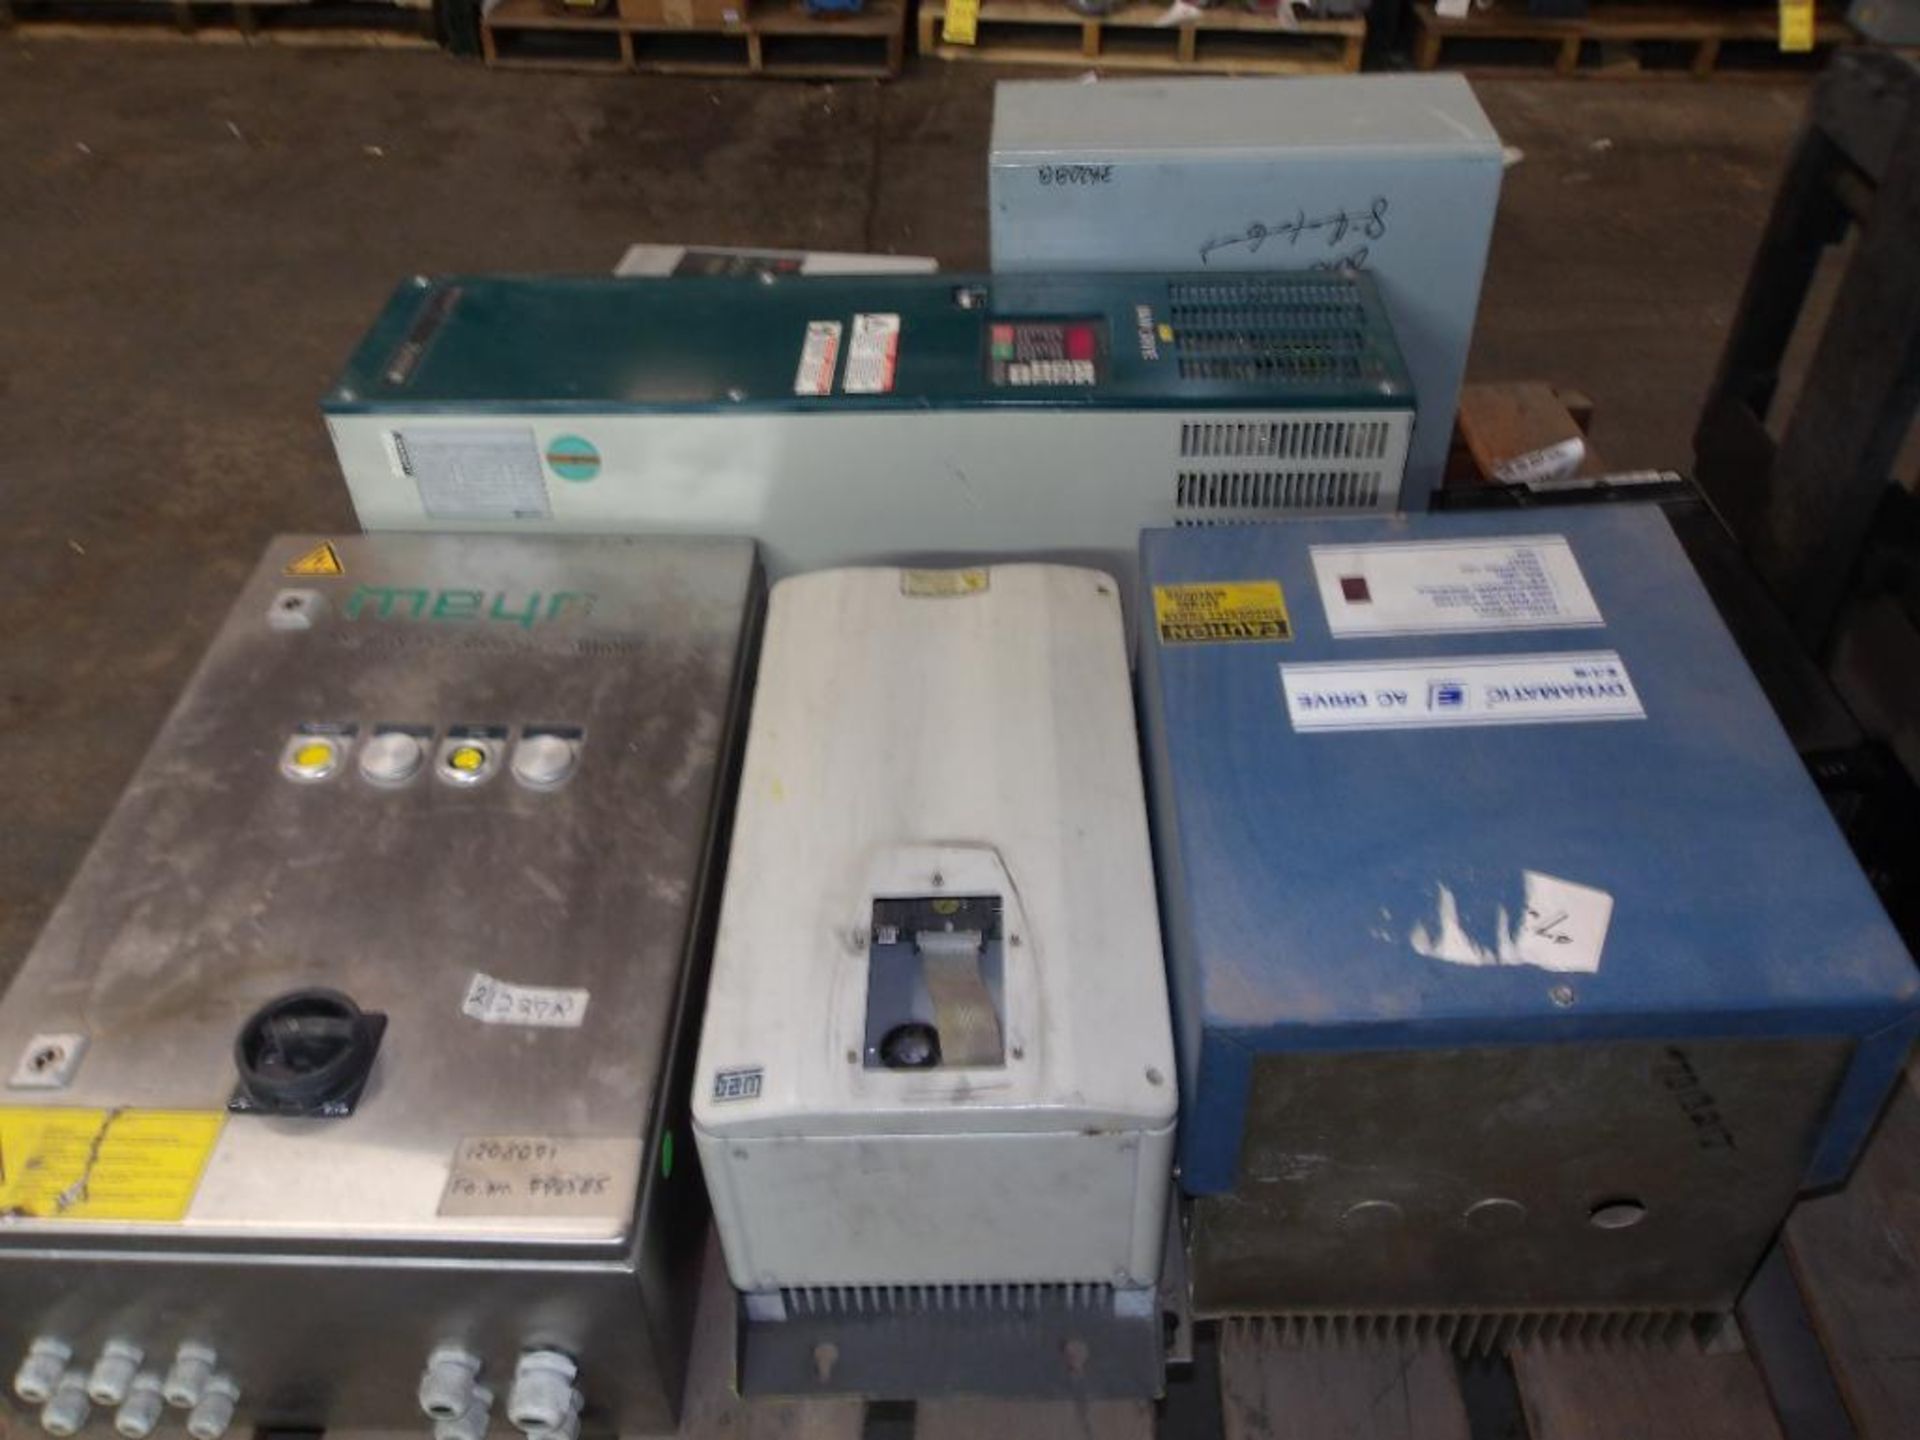 (Used) Controllers & Drives; Eaton, Weg, Reliance, Allen-Bradley, and More